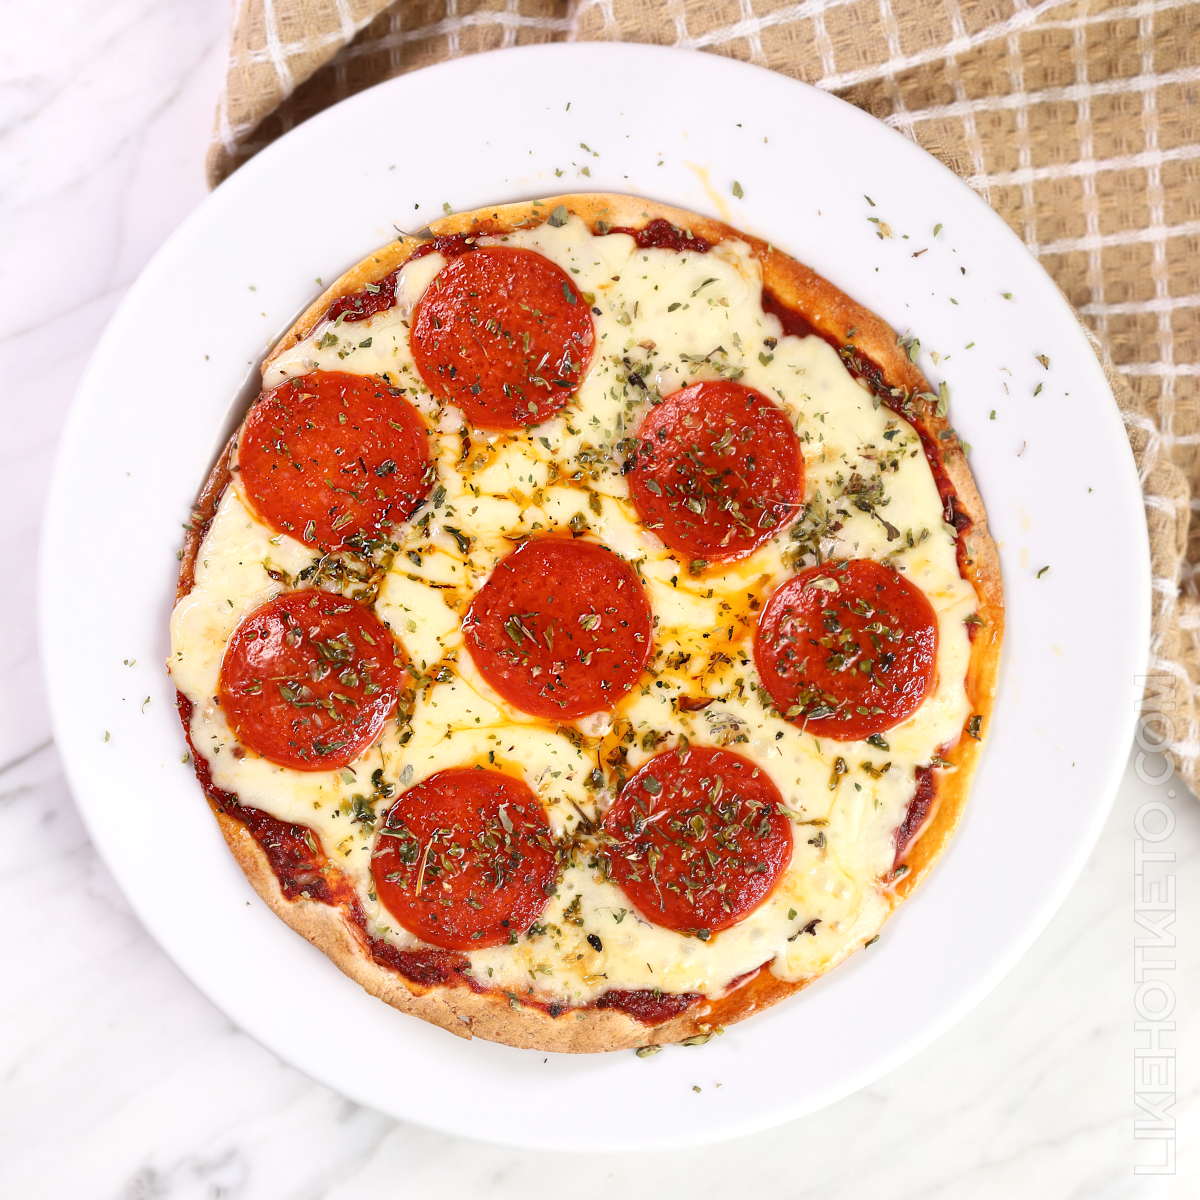 Crispy air fryer tortilla pizza in a white serving plate.